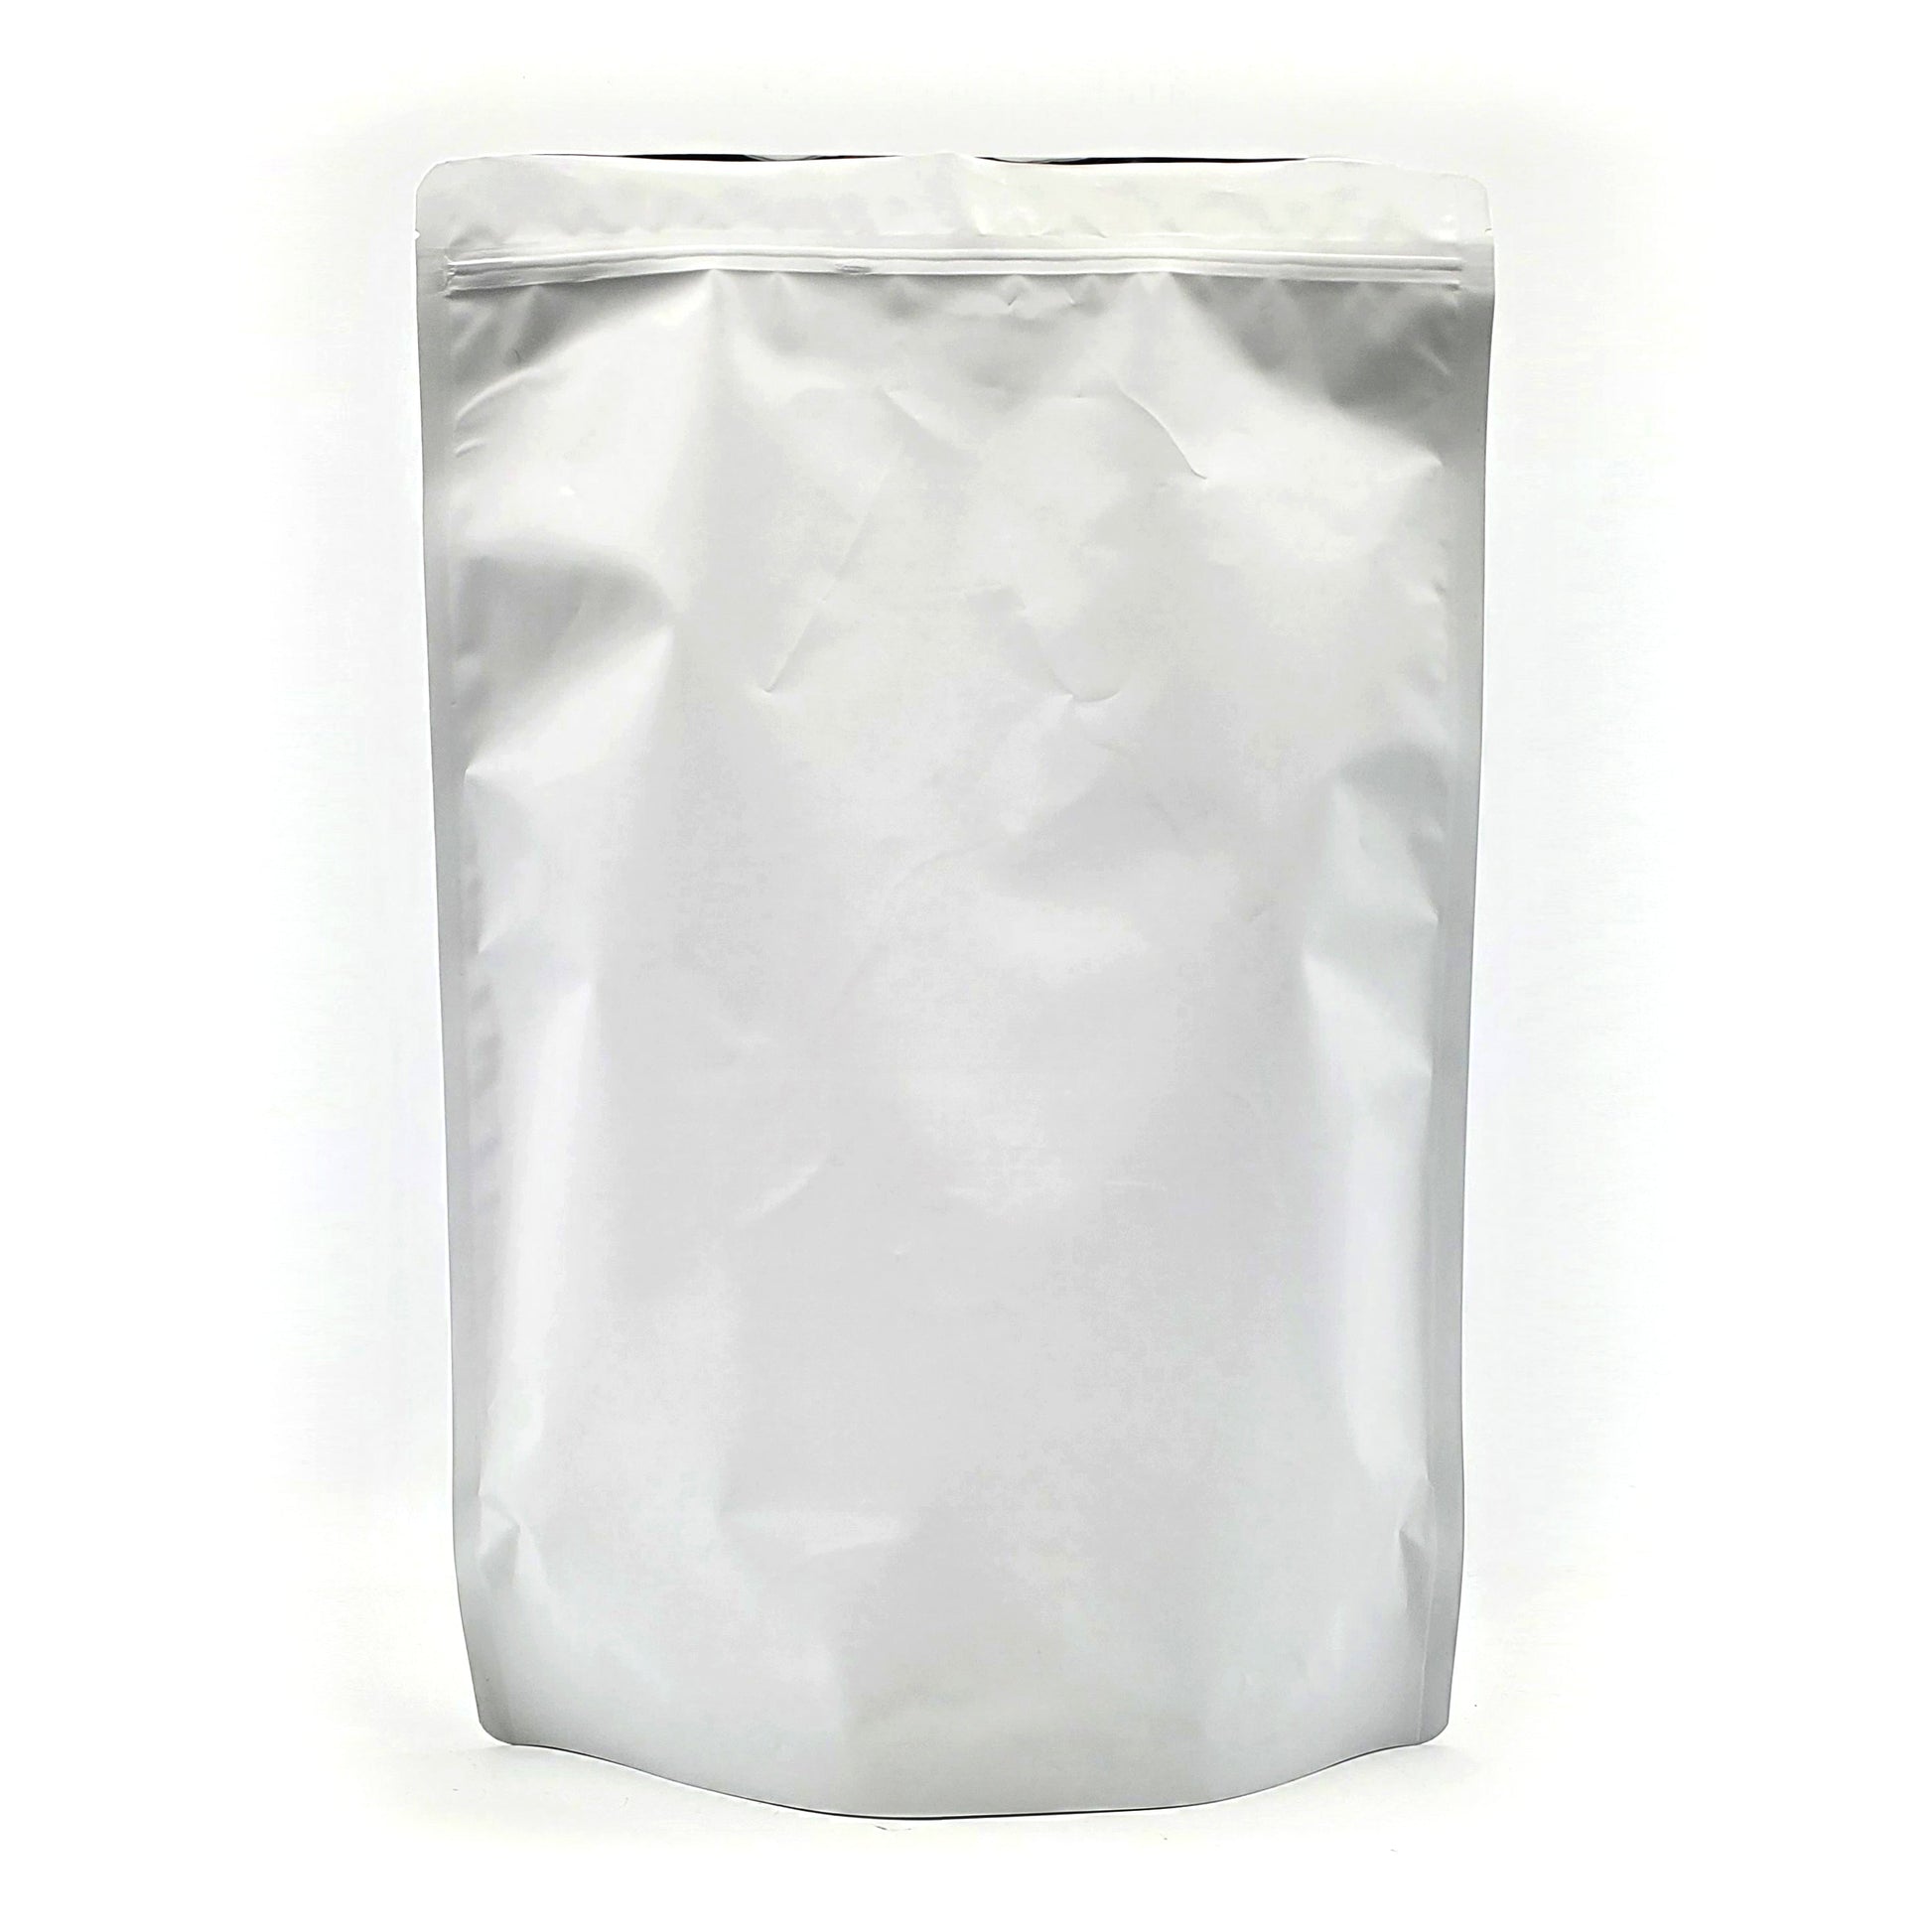 Smell Proof Mylar Opaque Pound Bag (1 lbs) 11.6" x 17.6"